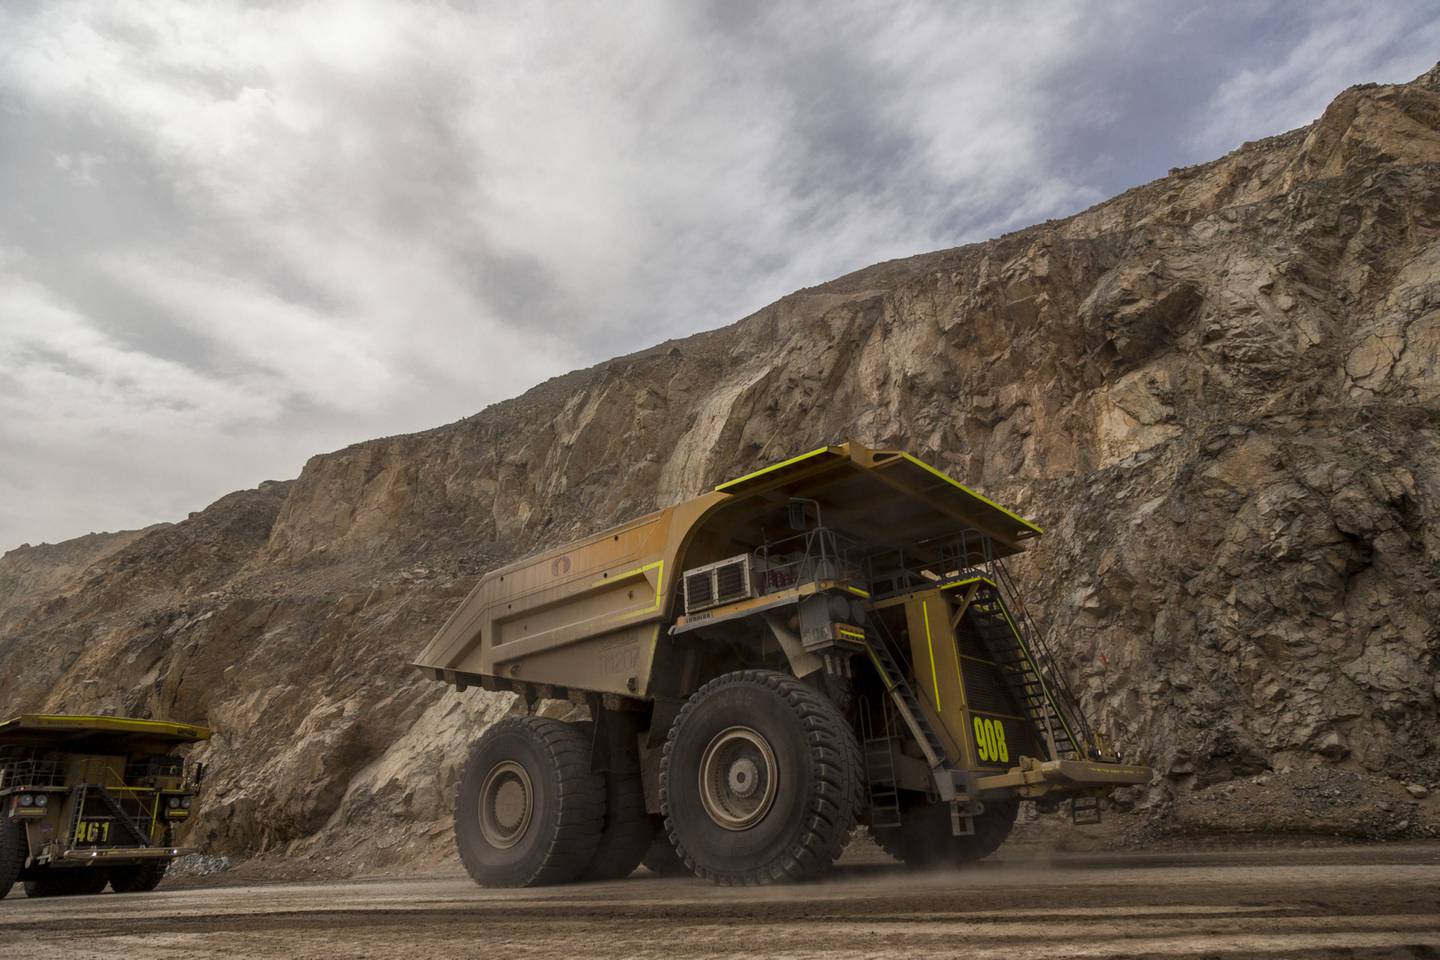 Mining is a fundamental piece of Chile's economy. / Photographer: Cristobal Olivares/Bloombergdfd